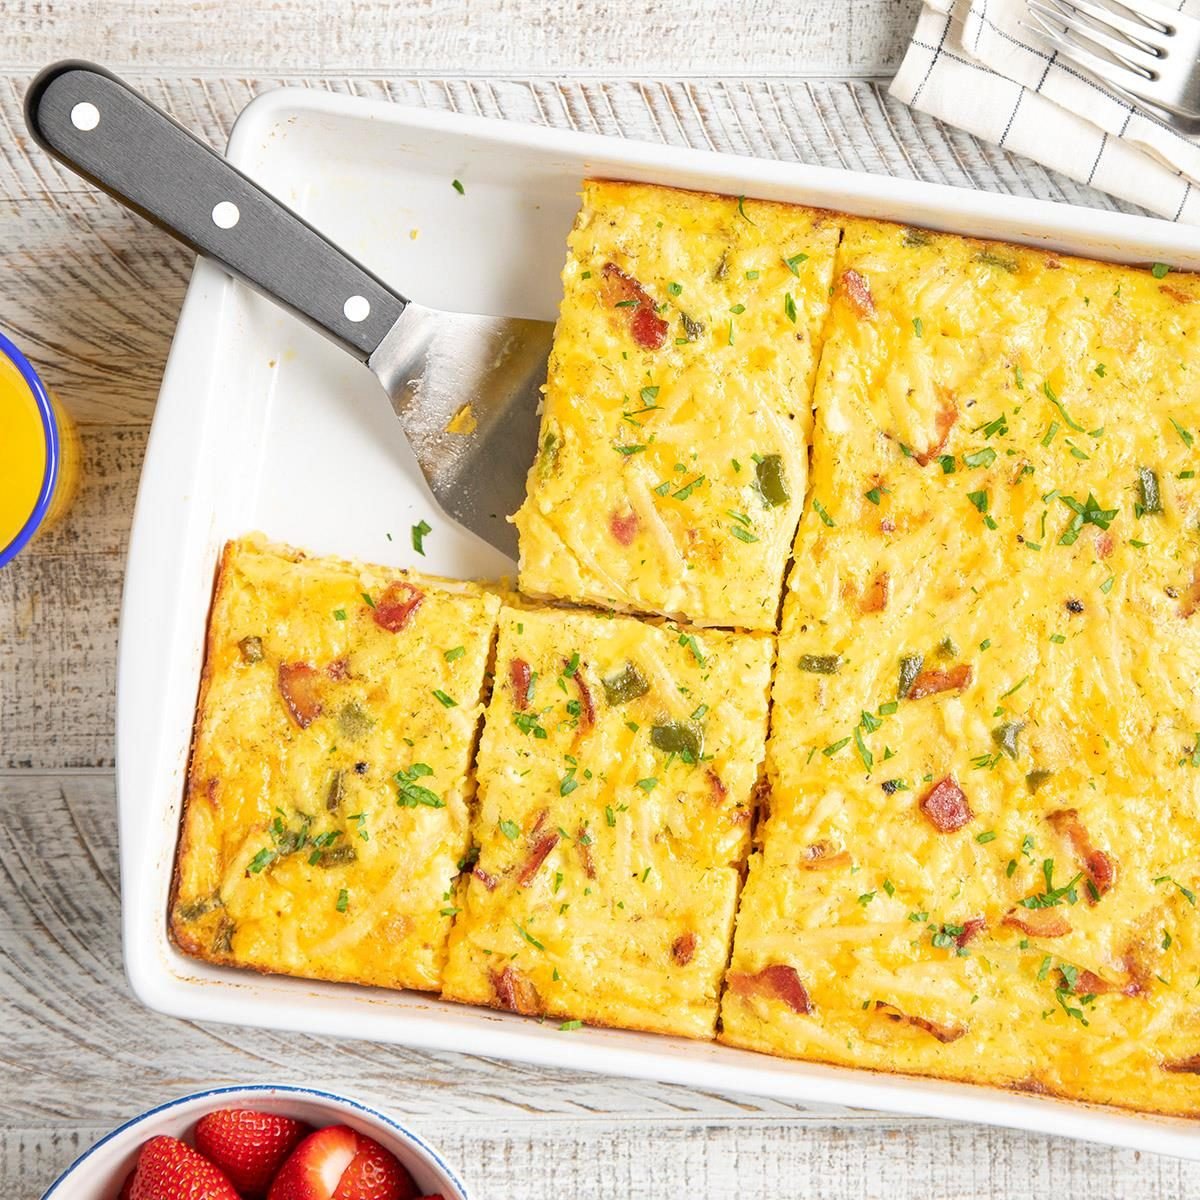 https://www.tasteofhome.com/wp-content/uploads/2018/01/Cheesy-Hash-Brown-Egg-Casserole-with-Bacon_EXPS_FT23_8441_ST_1_28_1.jpg